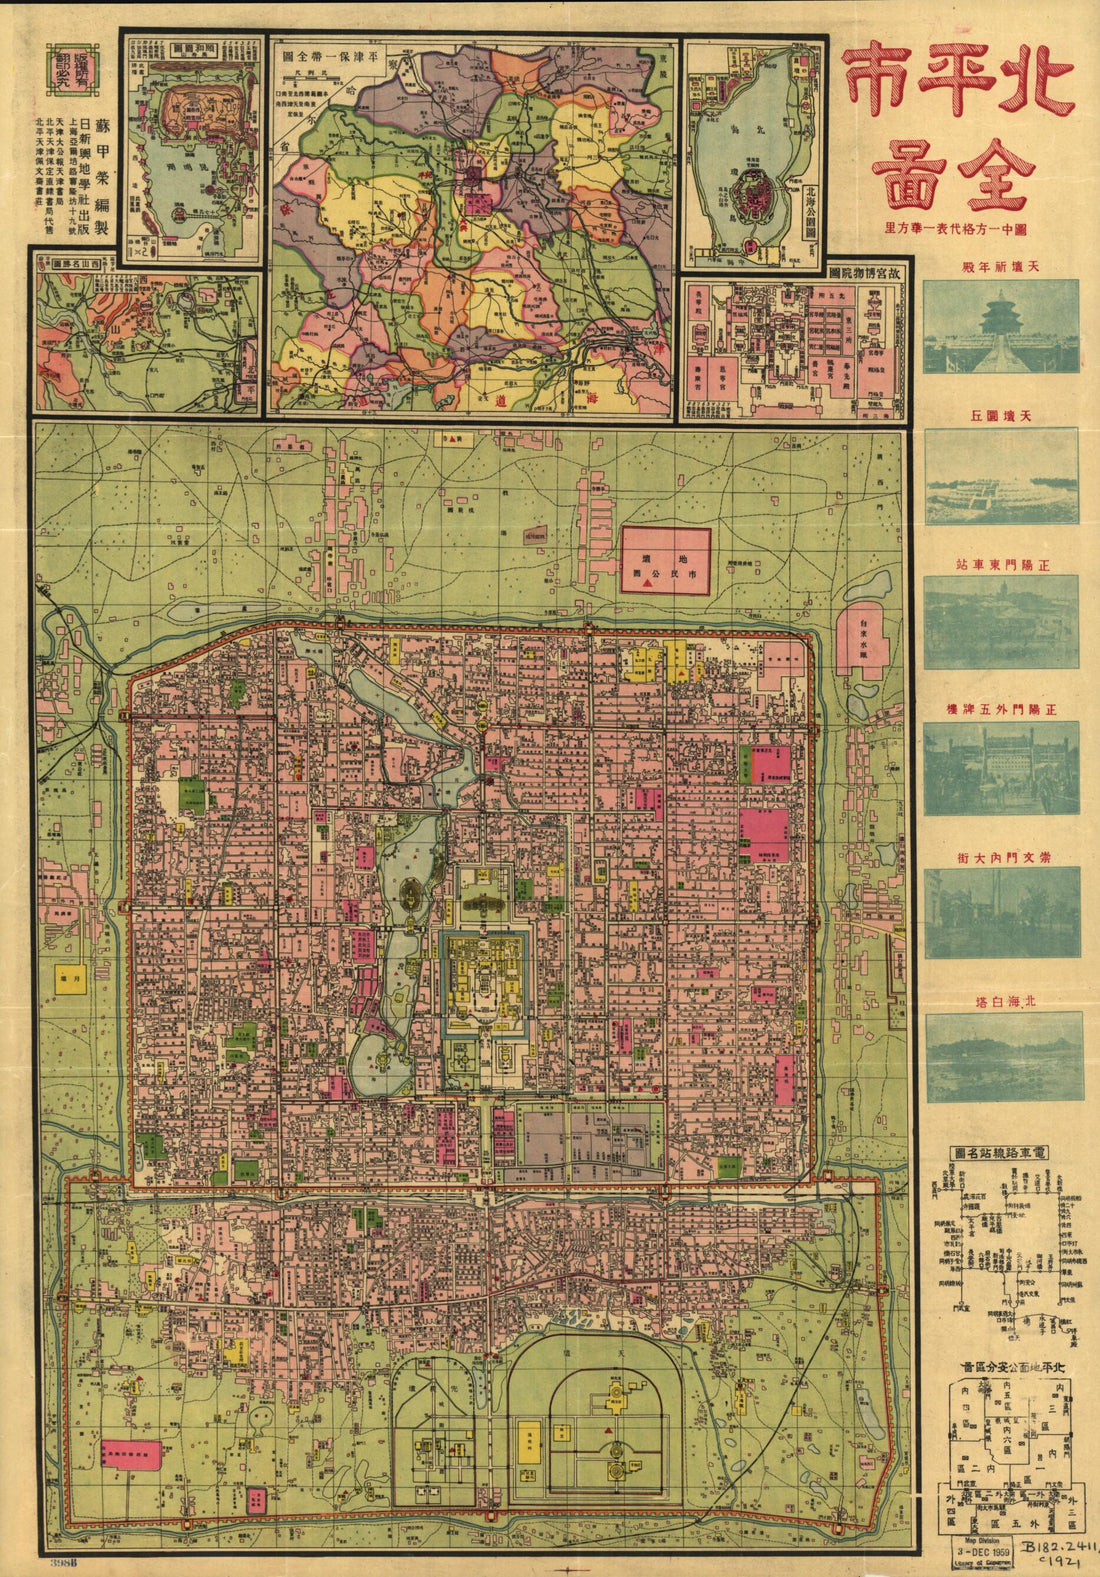 This old map of Beiping Shi Quan Tu from 1921 was created by Jiarong Su in 1921